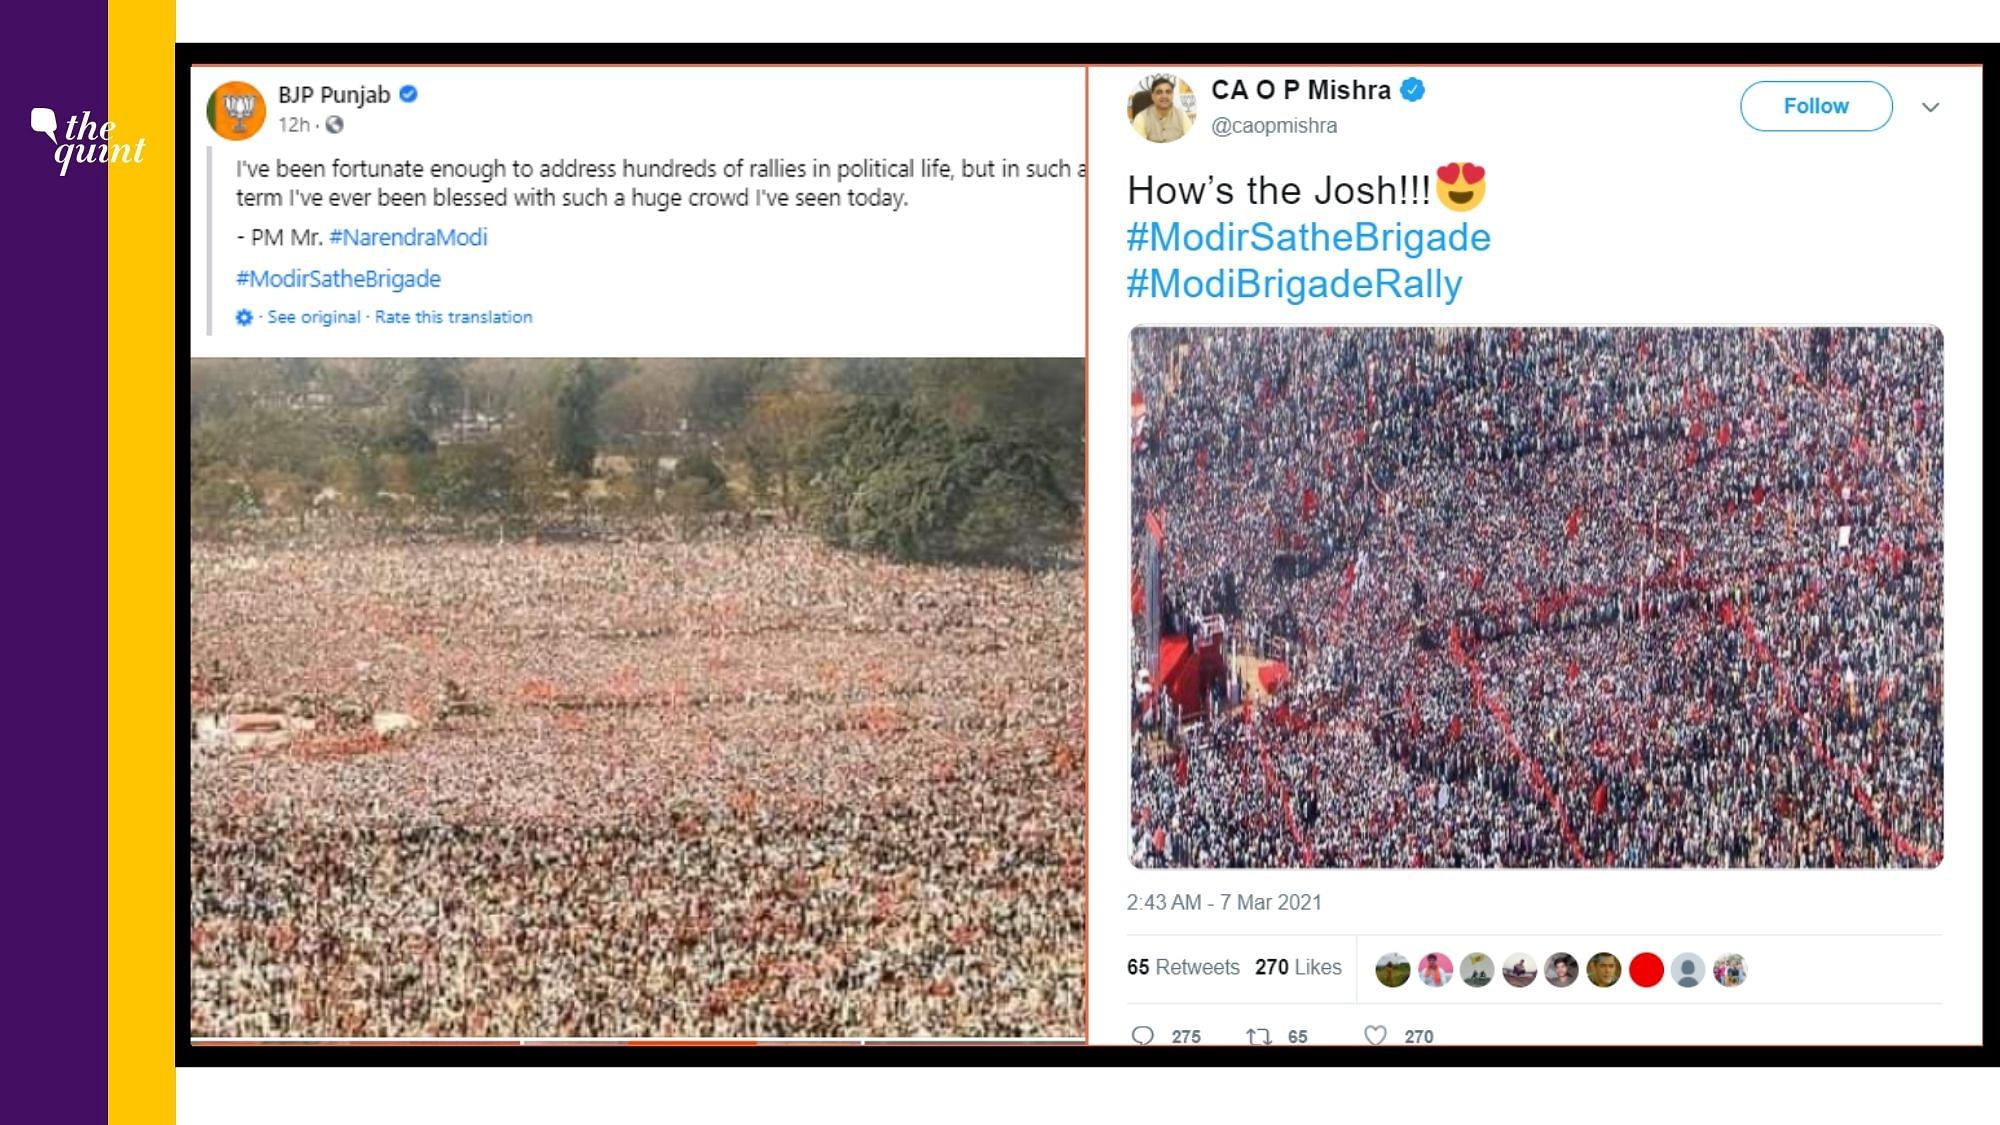 We found that some photos were actually from the Left front rallies that were held in 2014 and 2019.